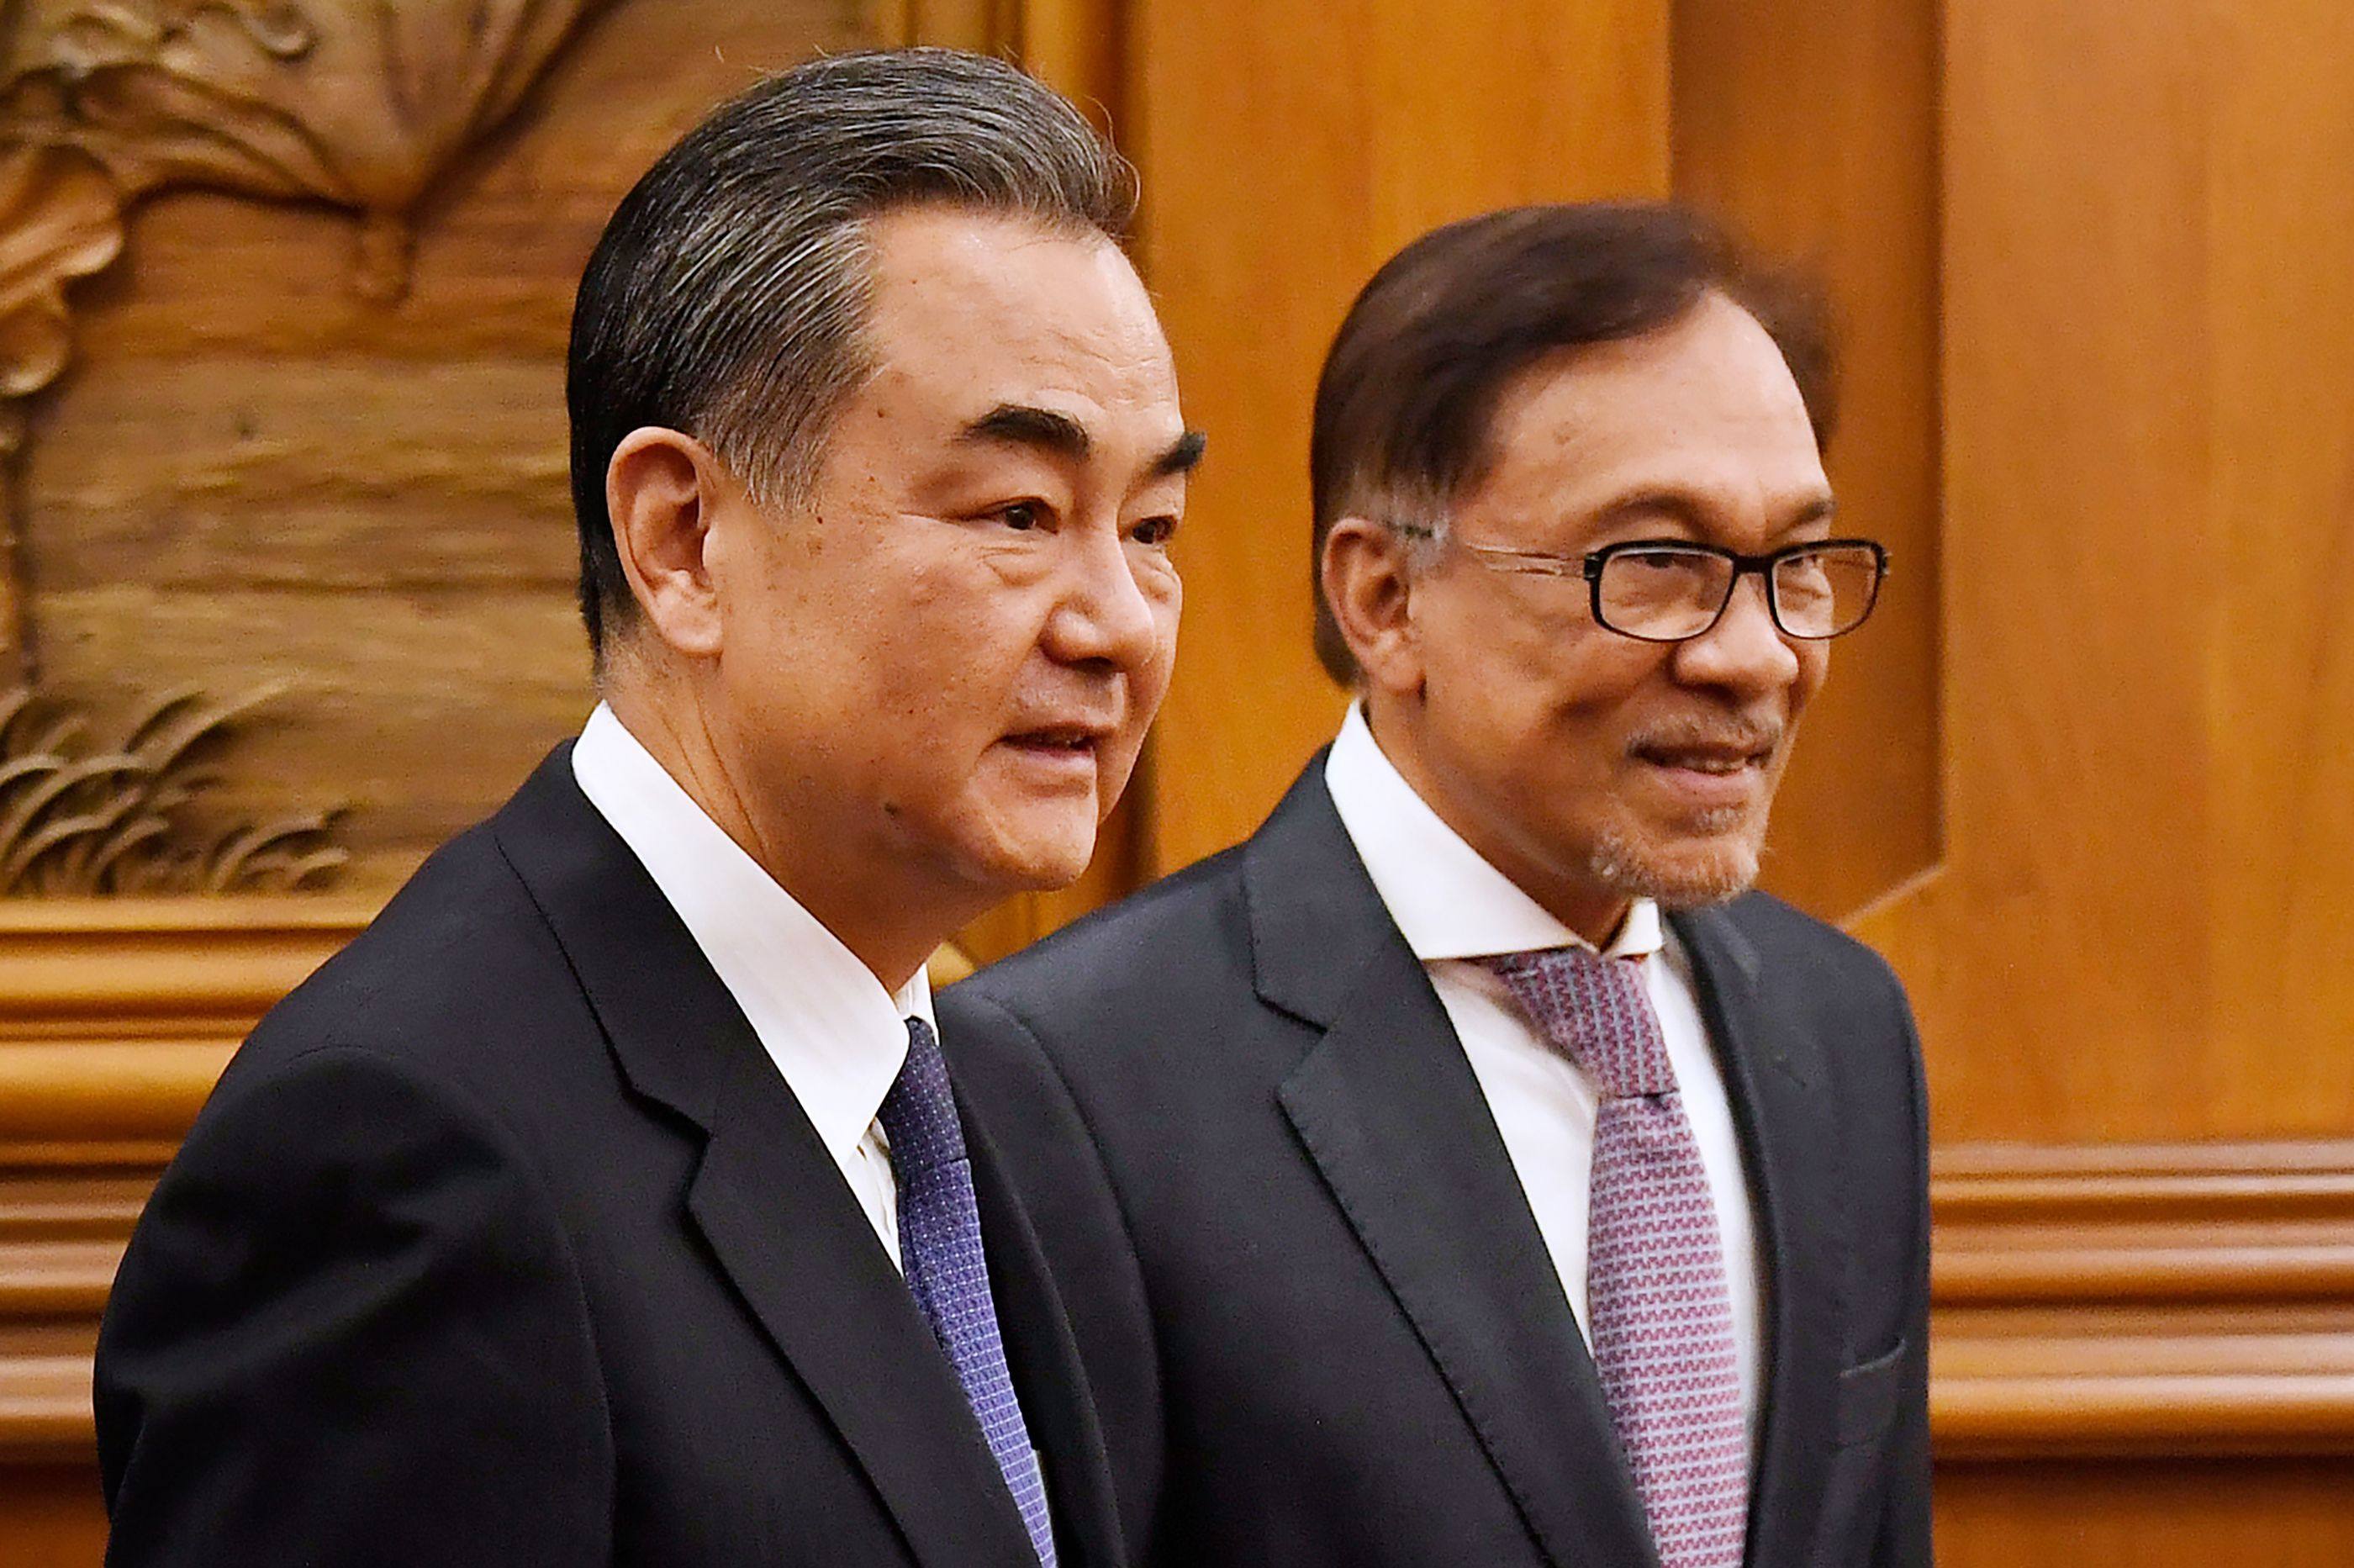 Malaysia’s new PM Anwar Ibrahim has described ties with China as ‘pivotal’. Photo: AFP